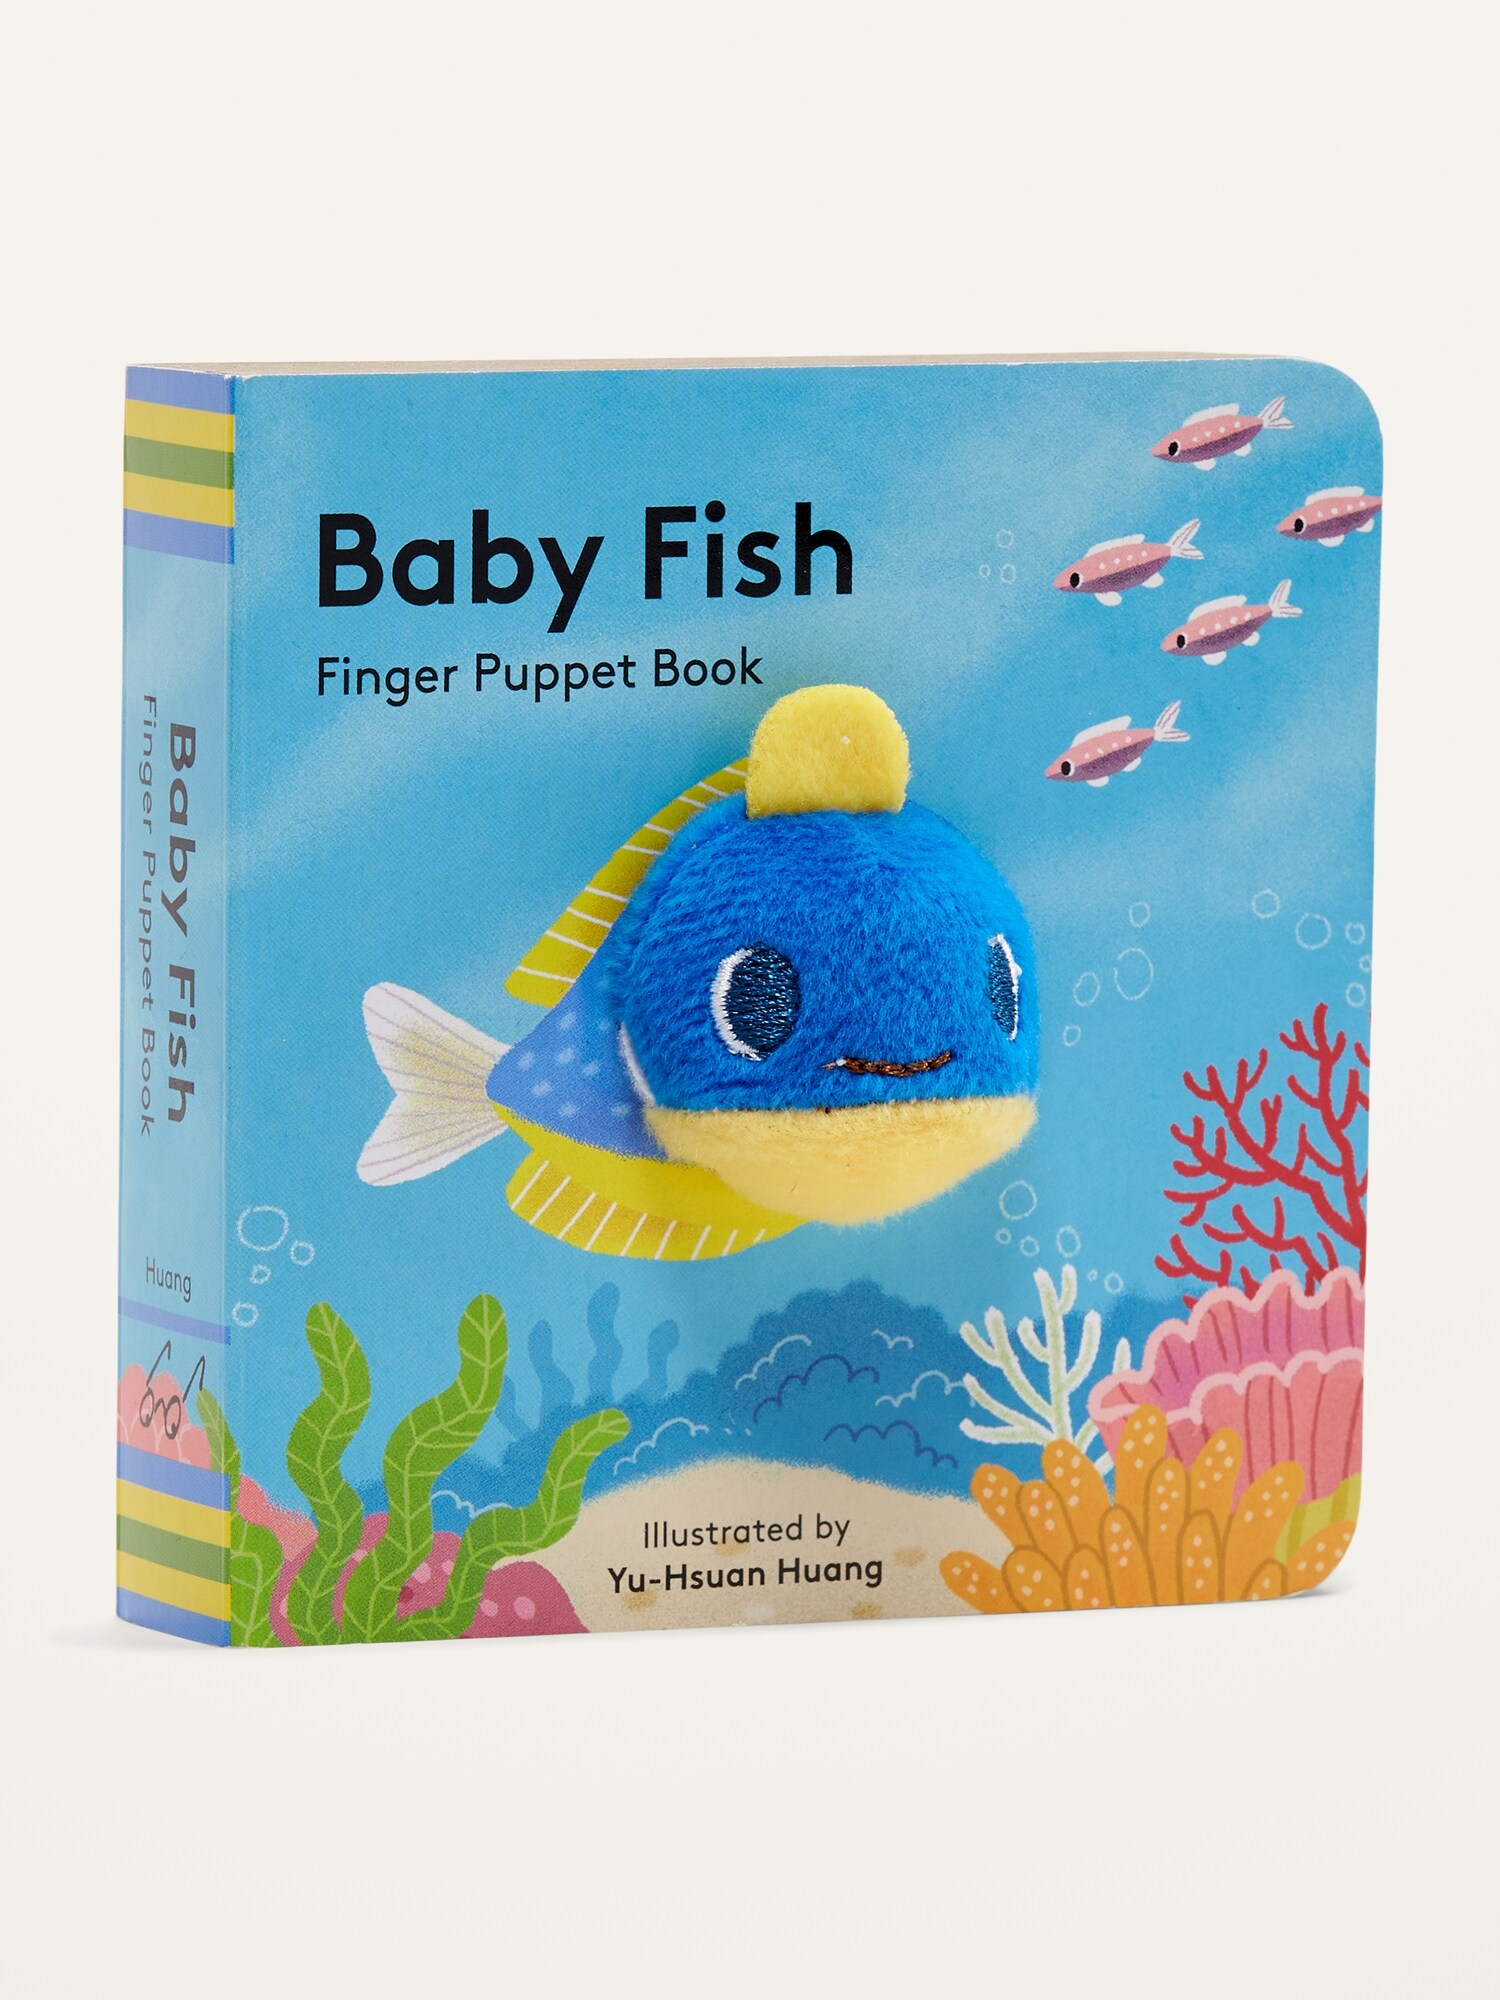 Old Navy "Baby Fish: Finger Puppet Book" Board Book for Toddler green. 1